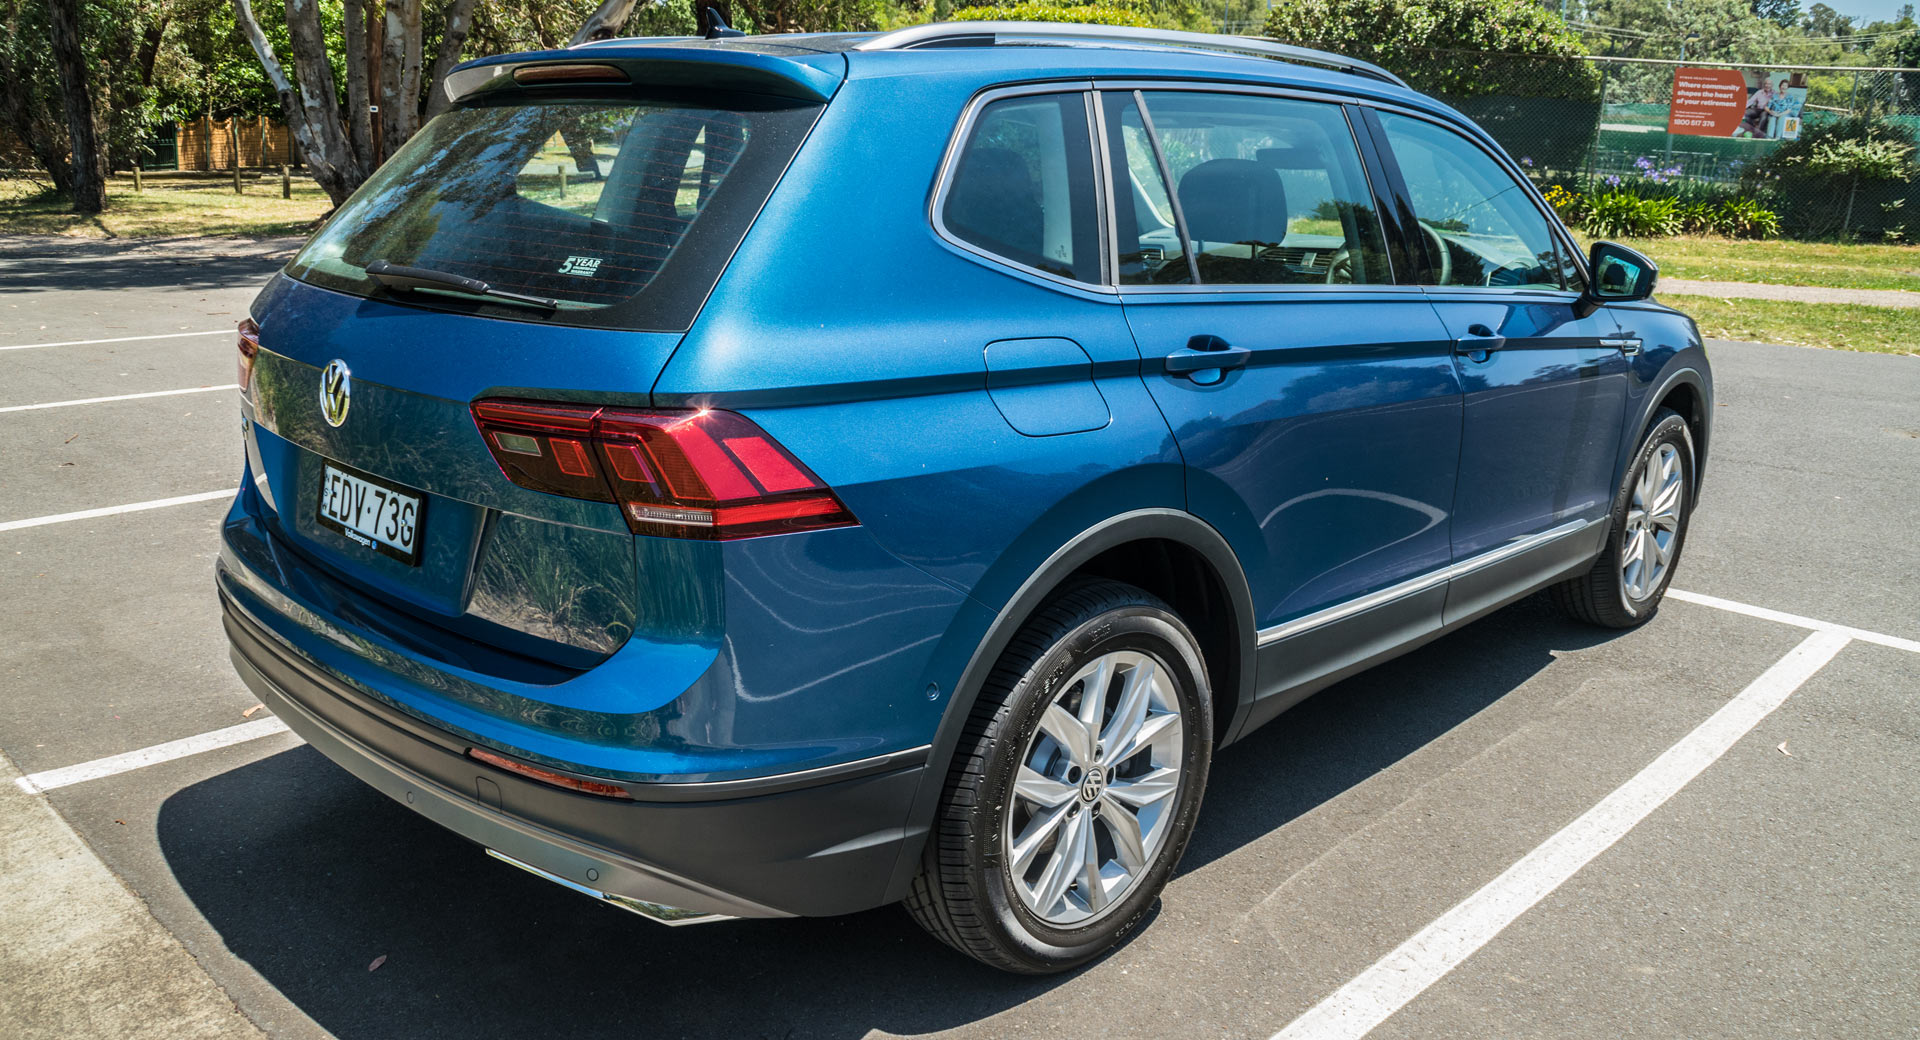 Driven: 2019 VW Tiguan Allspace 110 TSI Comfortline Is All About Space